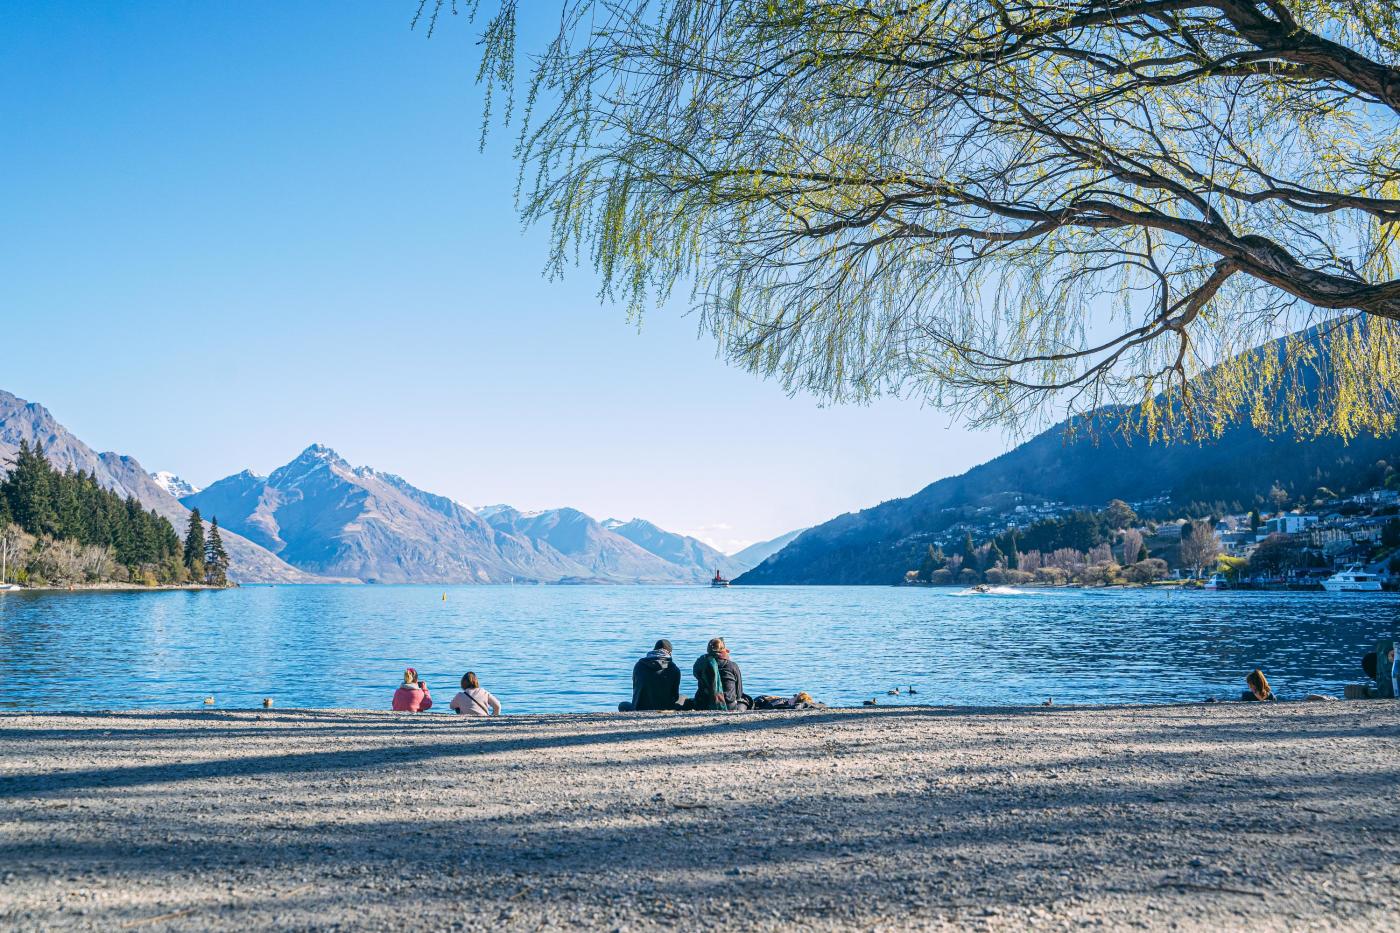 People sitting on Queenstown beach in spring with lake views and mountains in the background